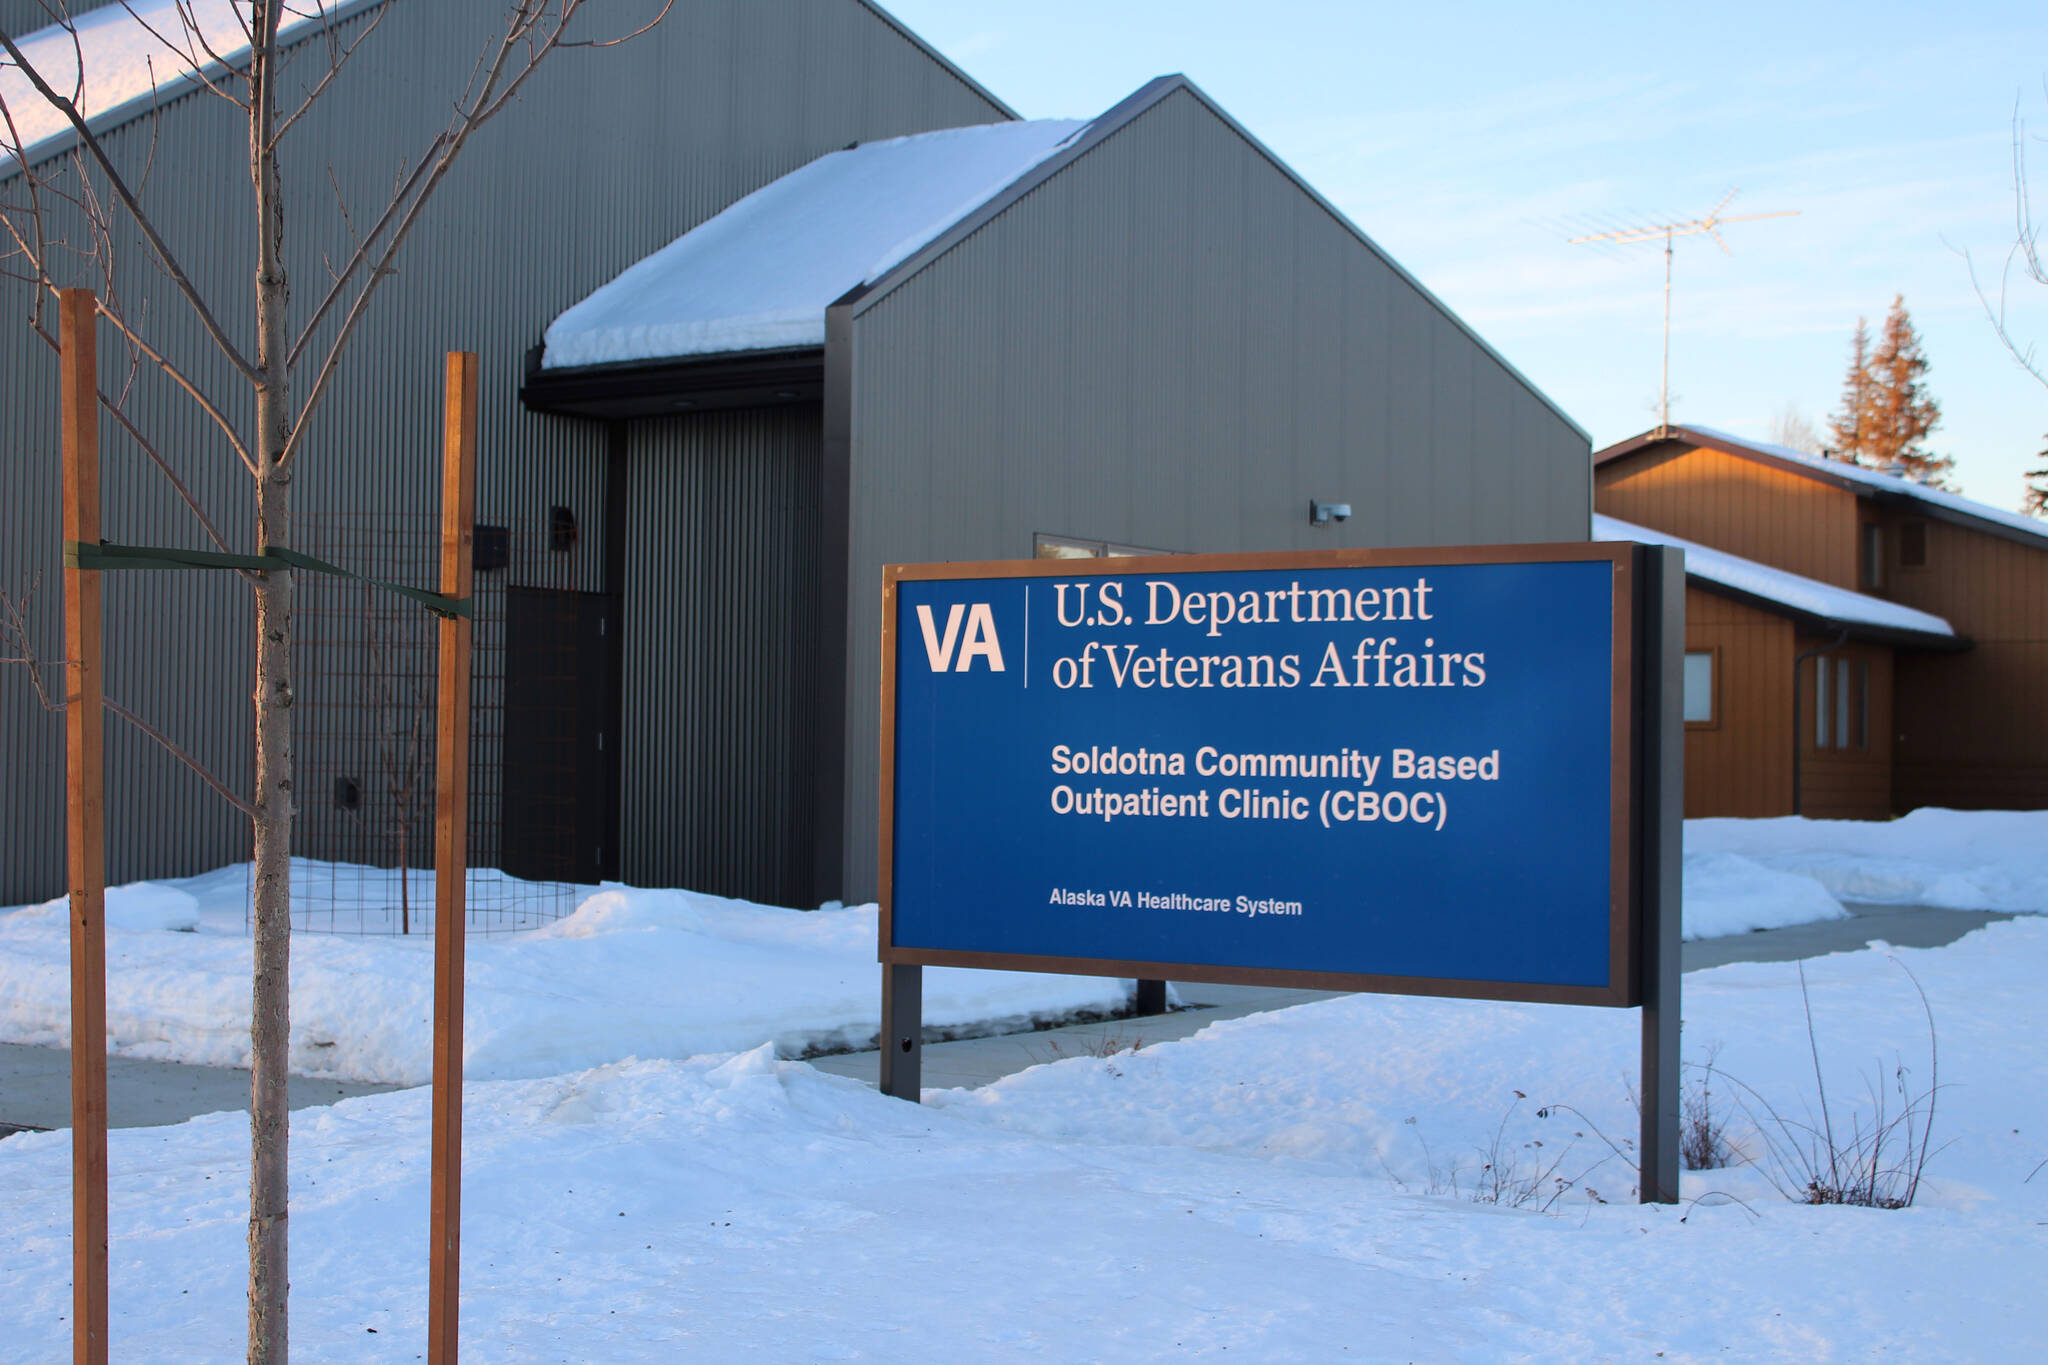 Signage indicates the entrance of the Soldotna Community Based Outpatient Clinic on Wednesday, Dec. 29, 2021 in Soldotna, Alaska. (Ashlyn O’Hara/Peninsula Clarion)